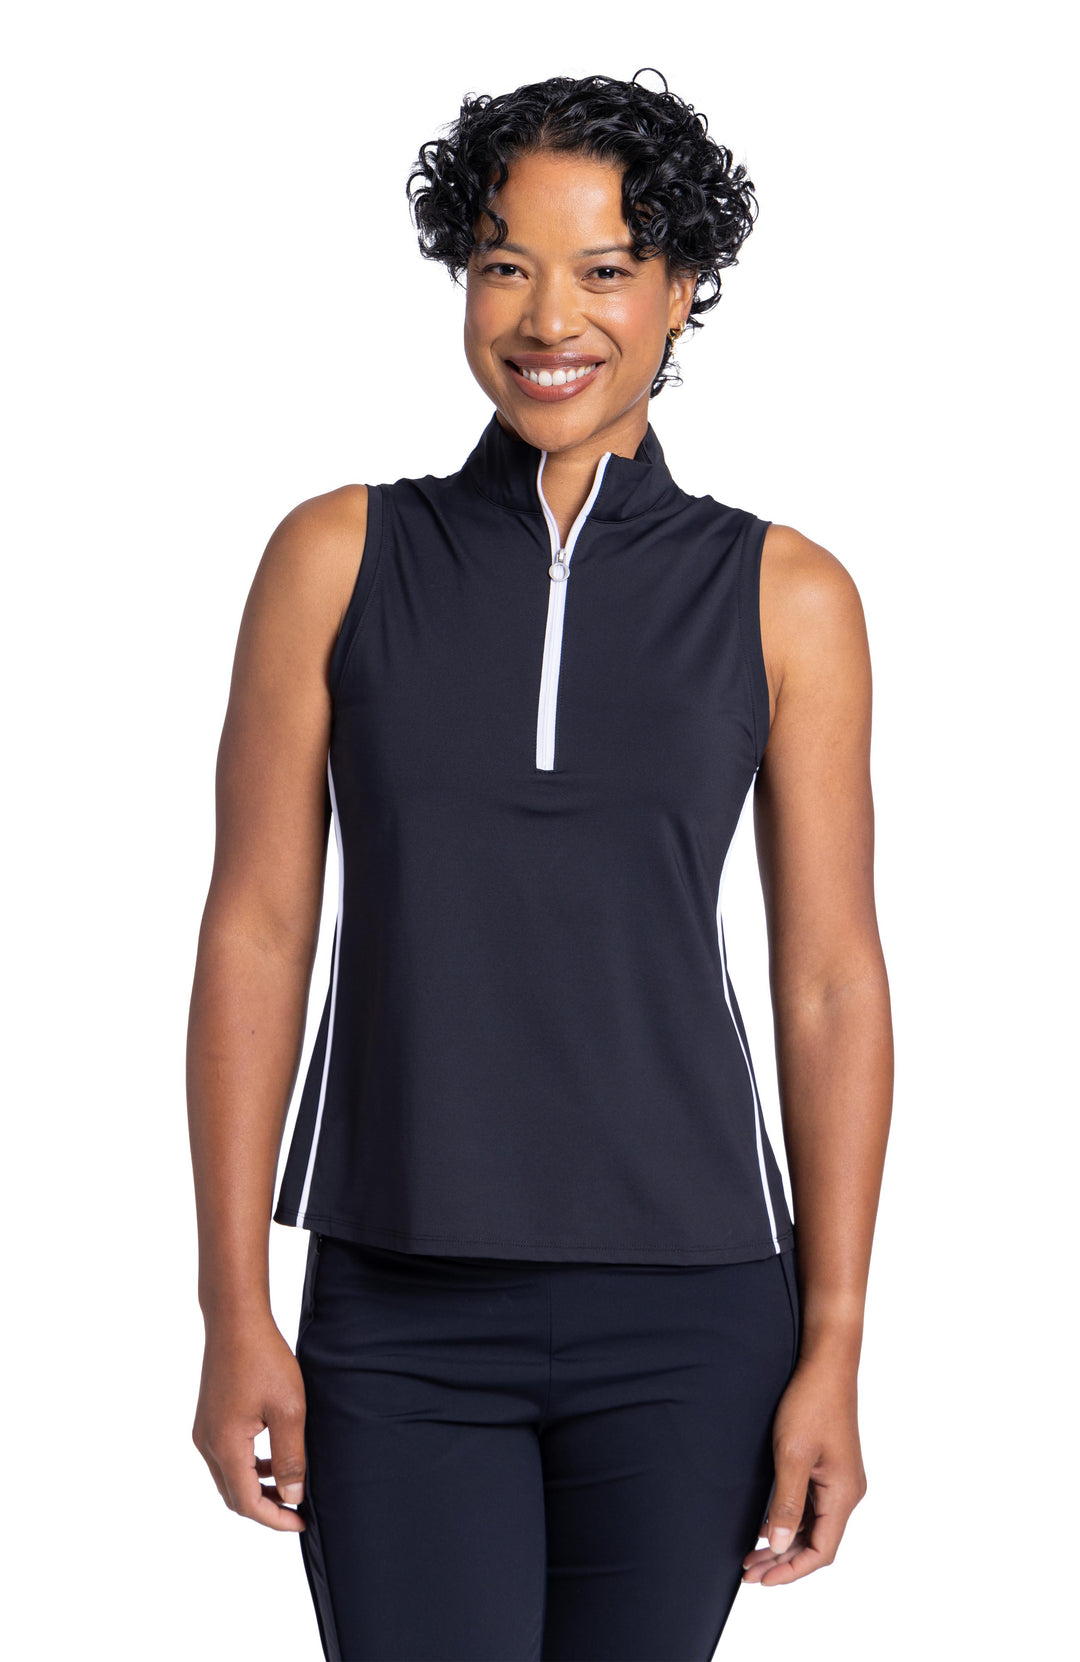 Women smiling wearing keep it covered sleeveless top in black with white trim